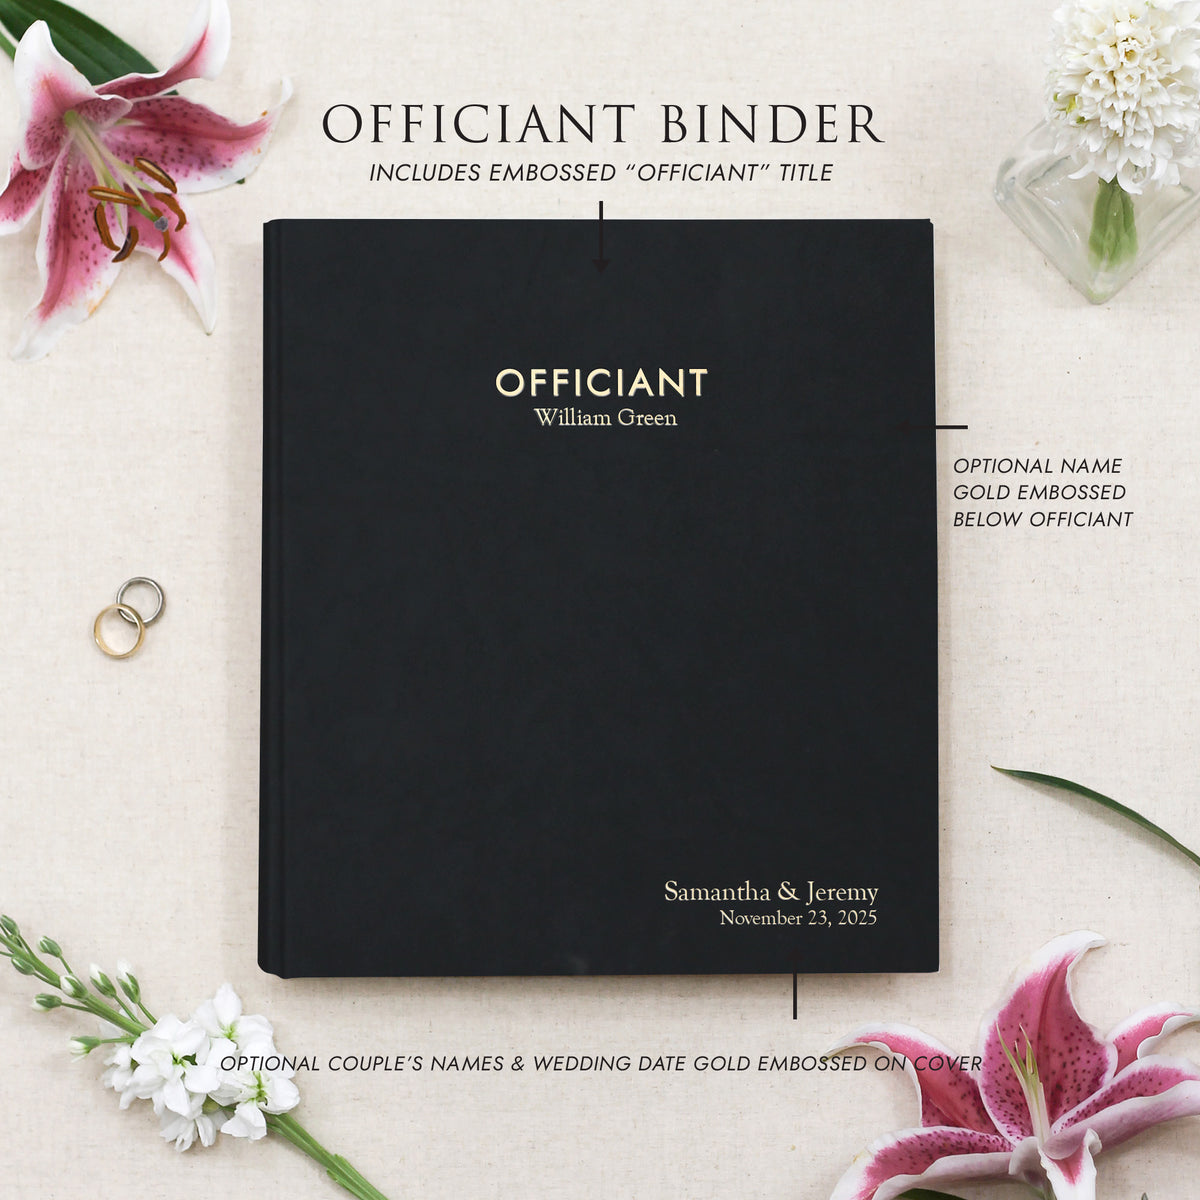 Officiant Binder | Cover: Black Vegan Leather | Available Personalized